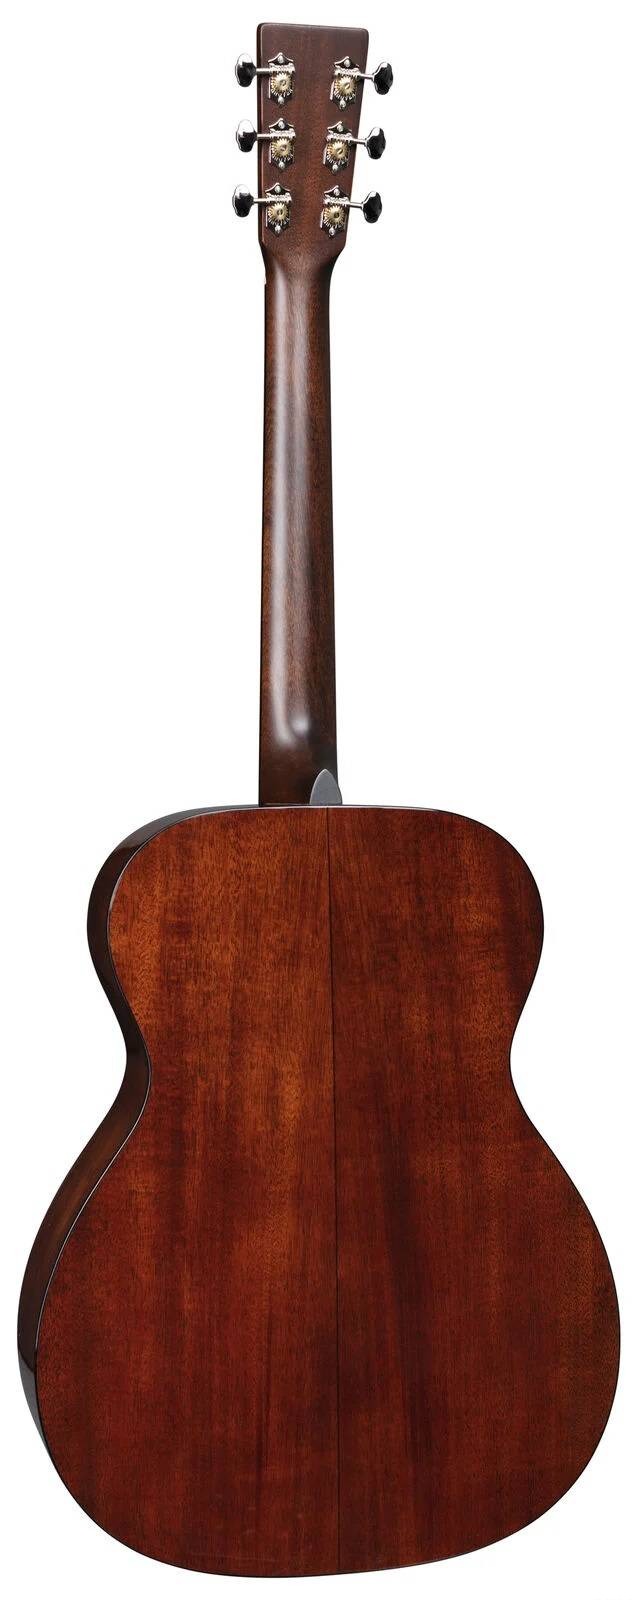 Martin 000-18 Standard Series 000 Acoustic Guitar Full Solid Spruce Top, Mahogany Back & Sides w/Hardcase & LR Baggs Pickup